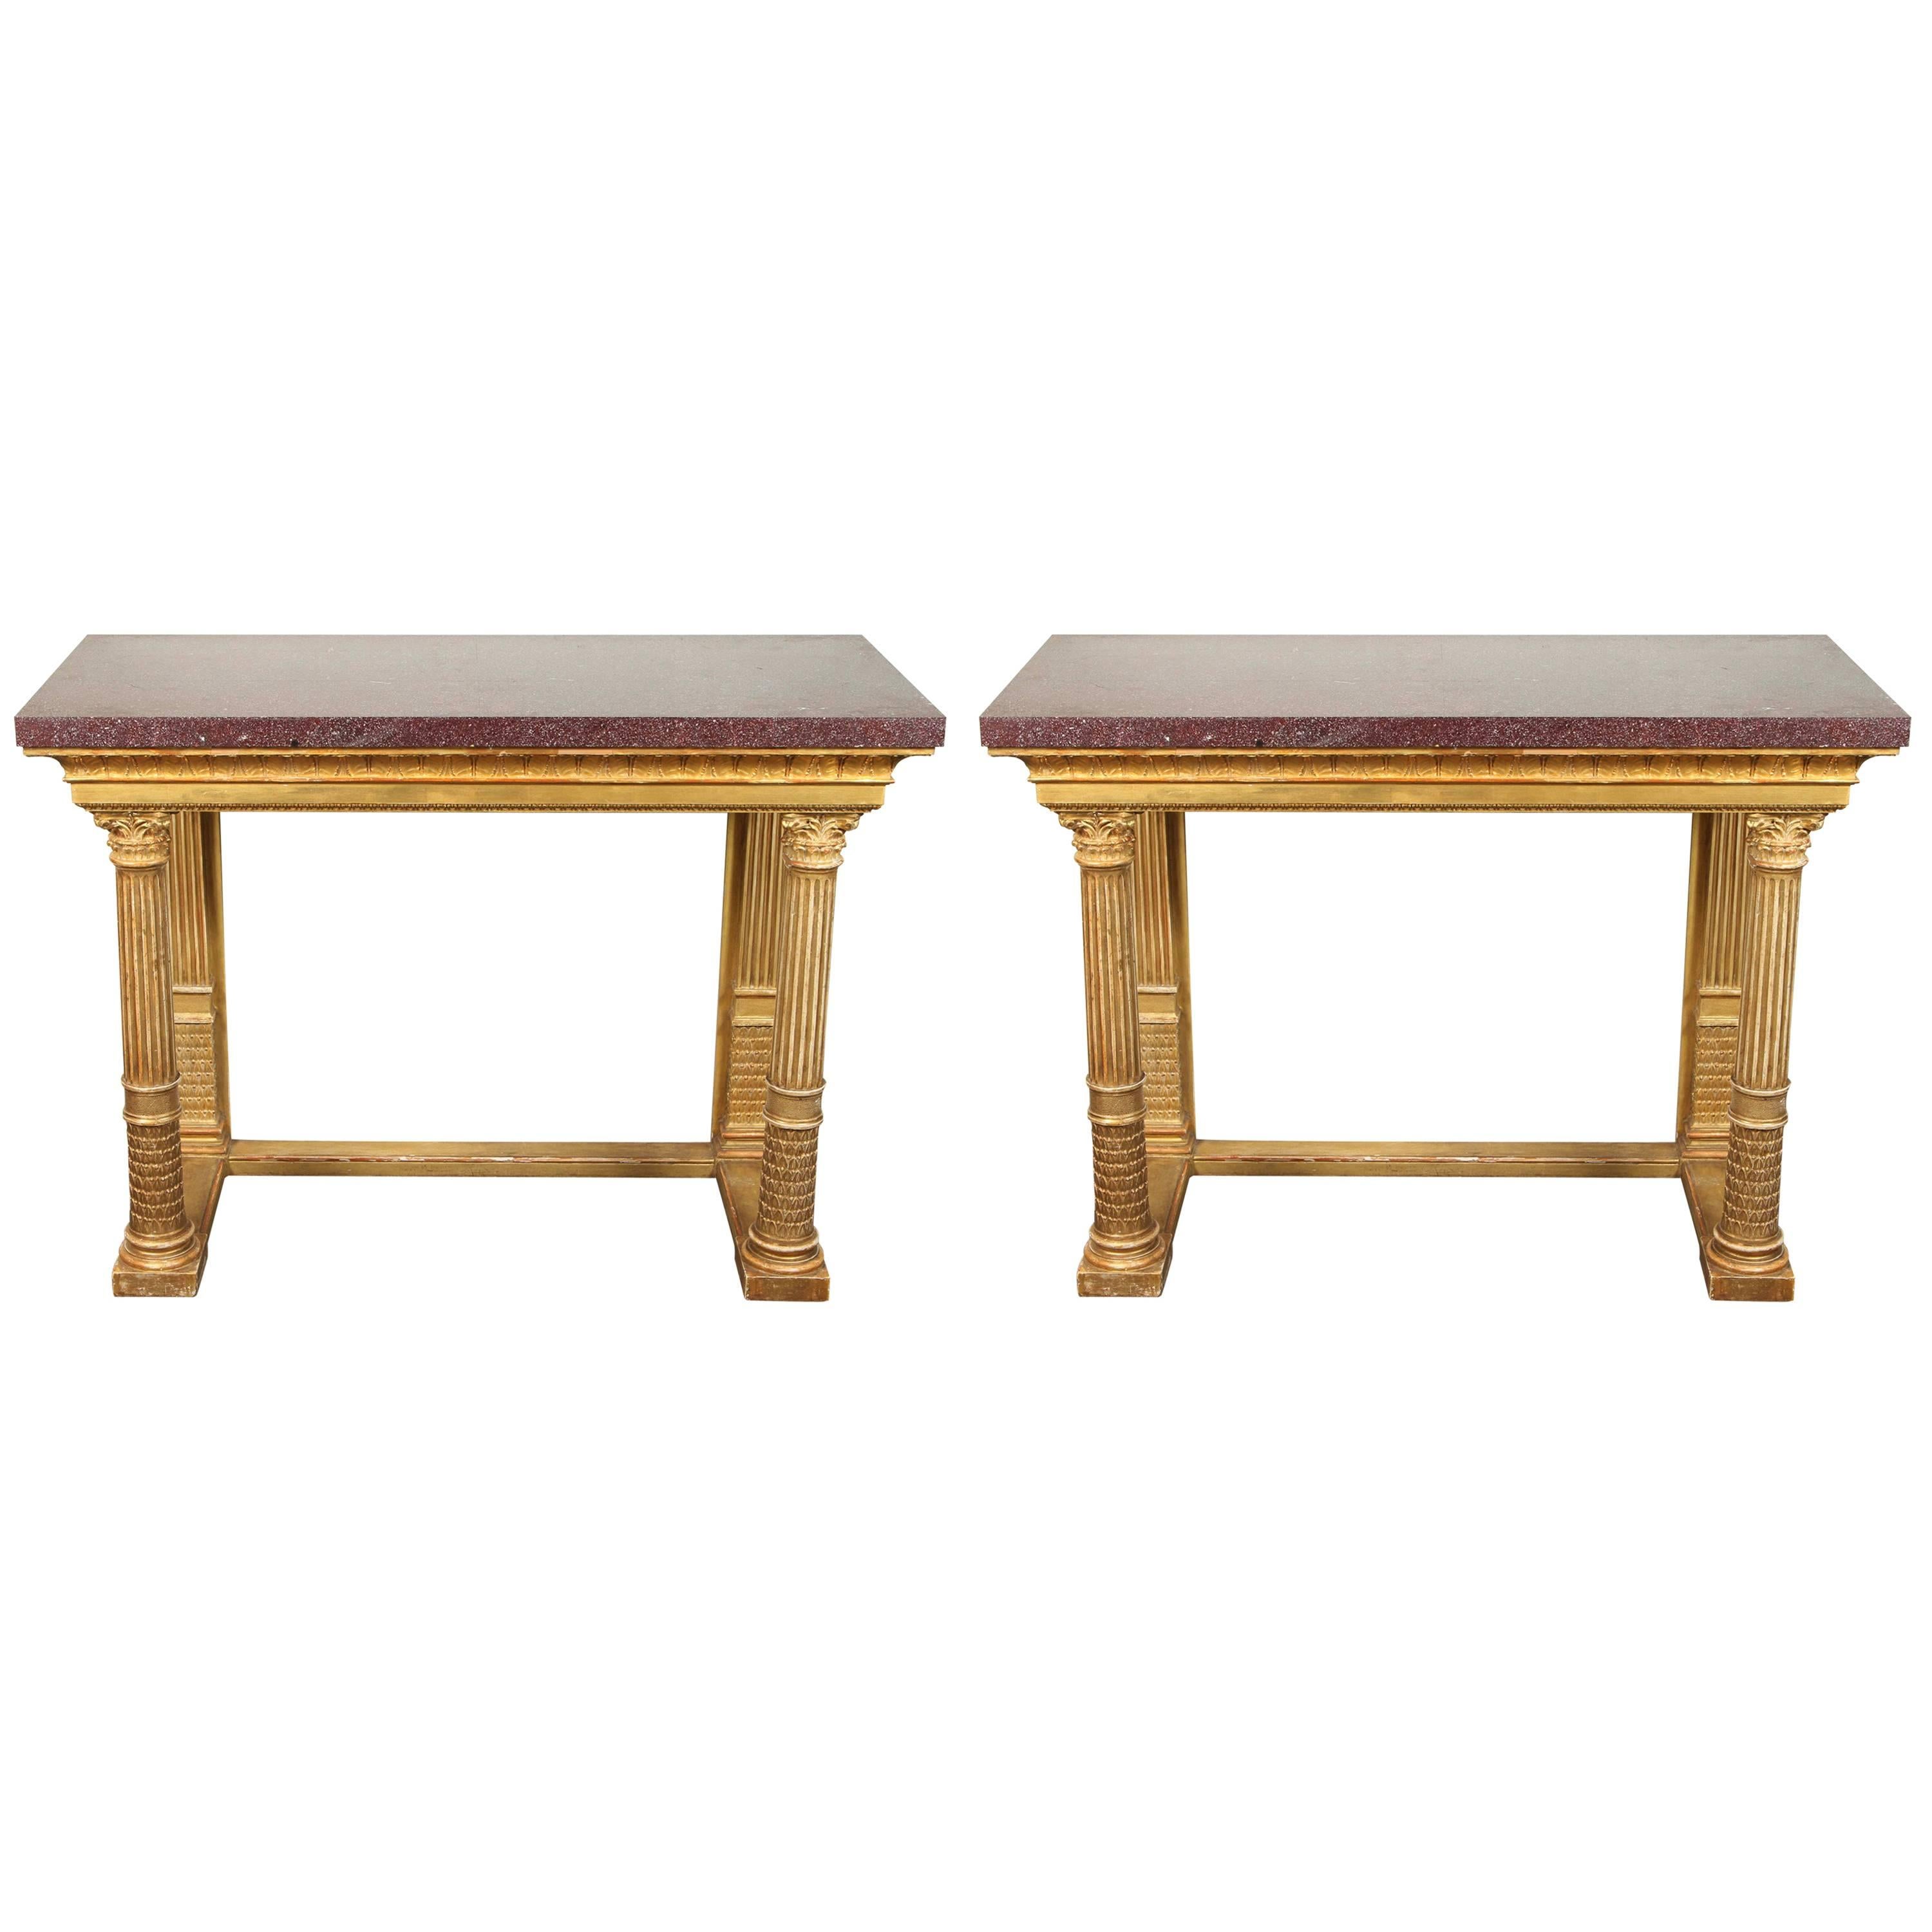 Excellent Pair of 19th Century, Gilded Consoles